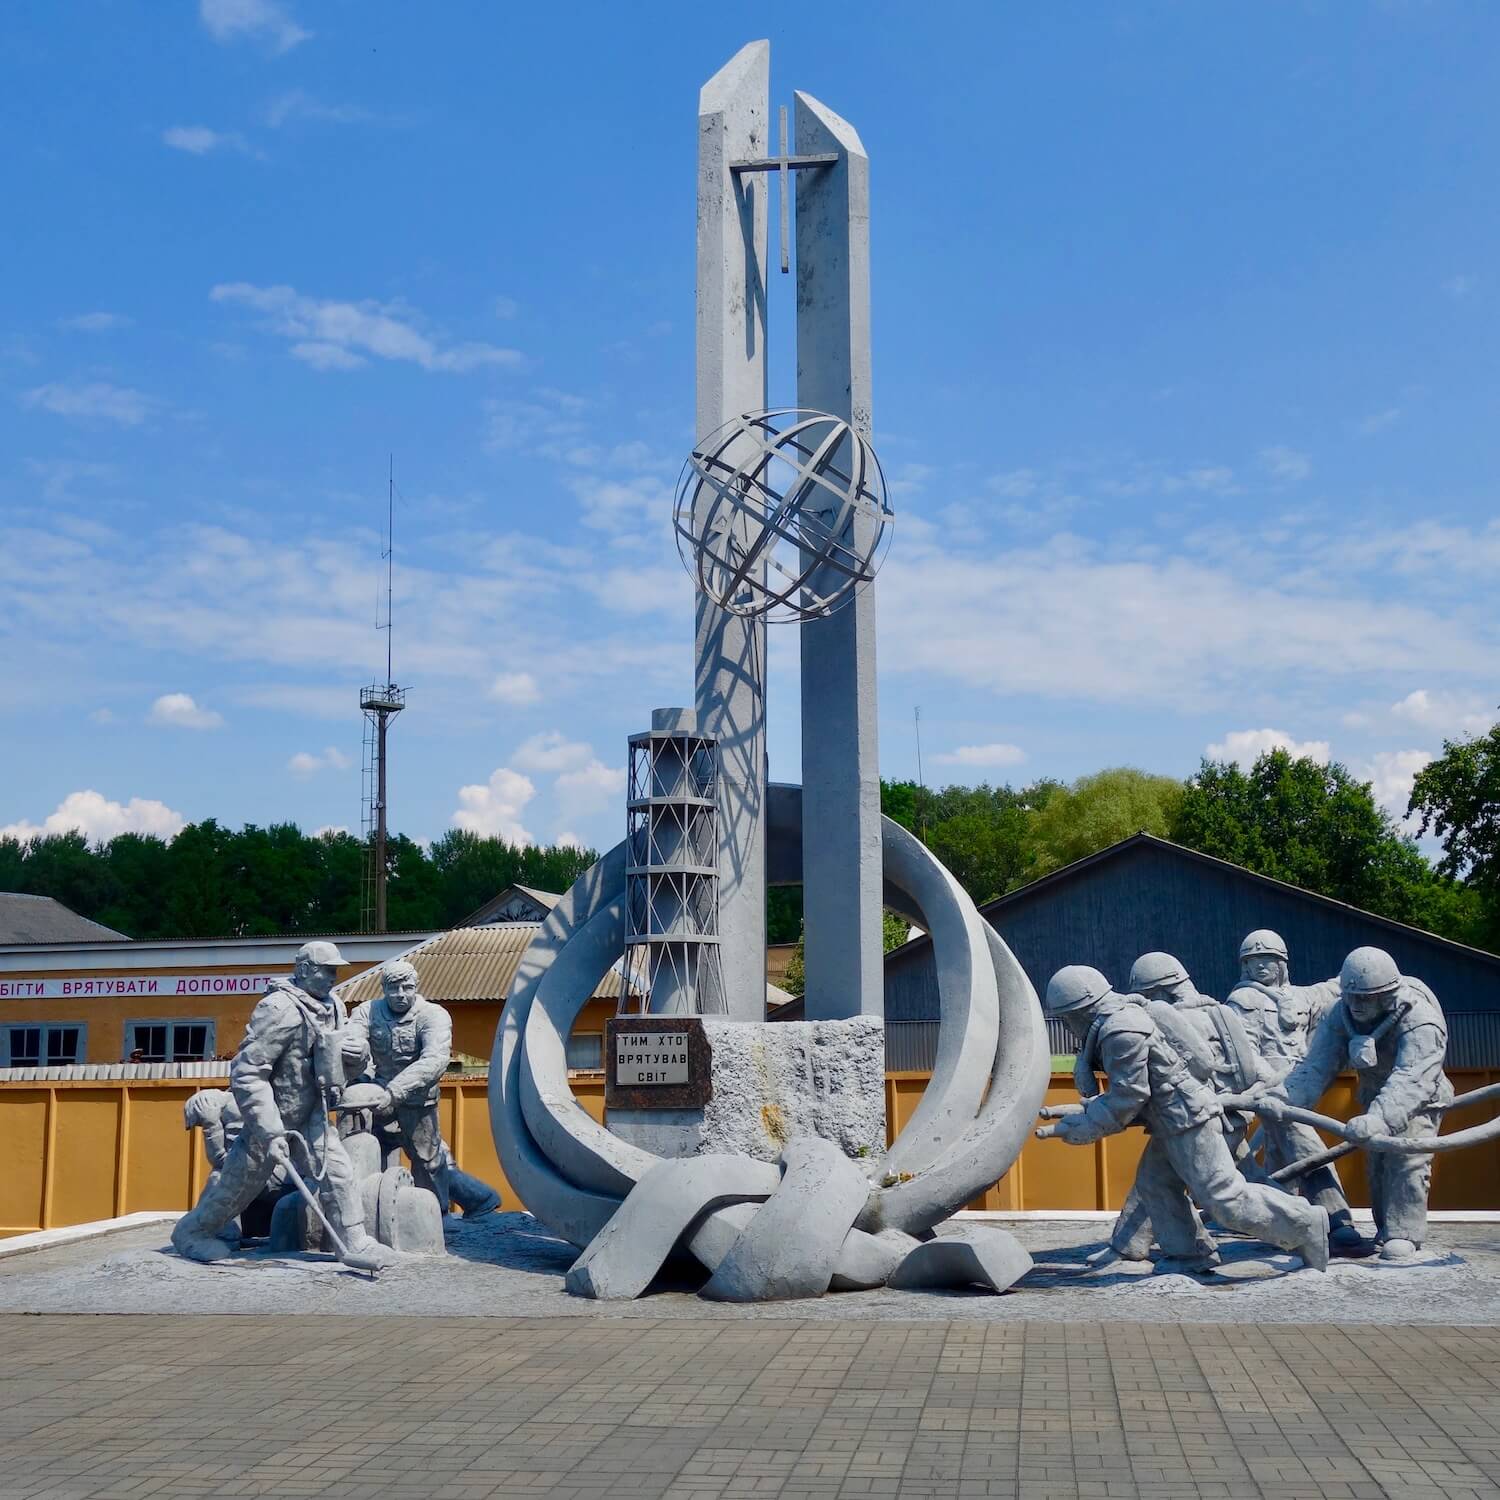 This memorial stands at the entrance to the city of Chernobyl, inside the 1000 square mile exclusion zone. The memorial honors the fireman that were first responders to the steam explosion in April 1986 as well as the divers who went into the underground water supply underneath reactor #4 to prevent a larger disaster.